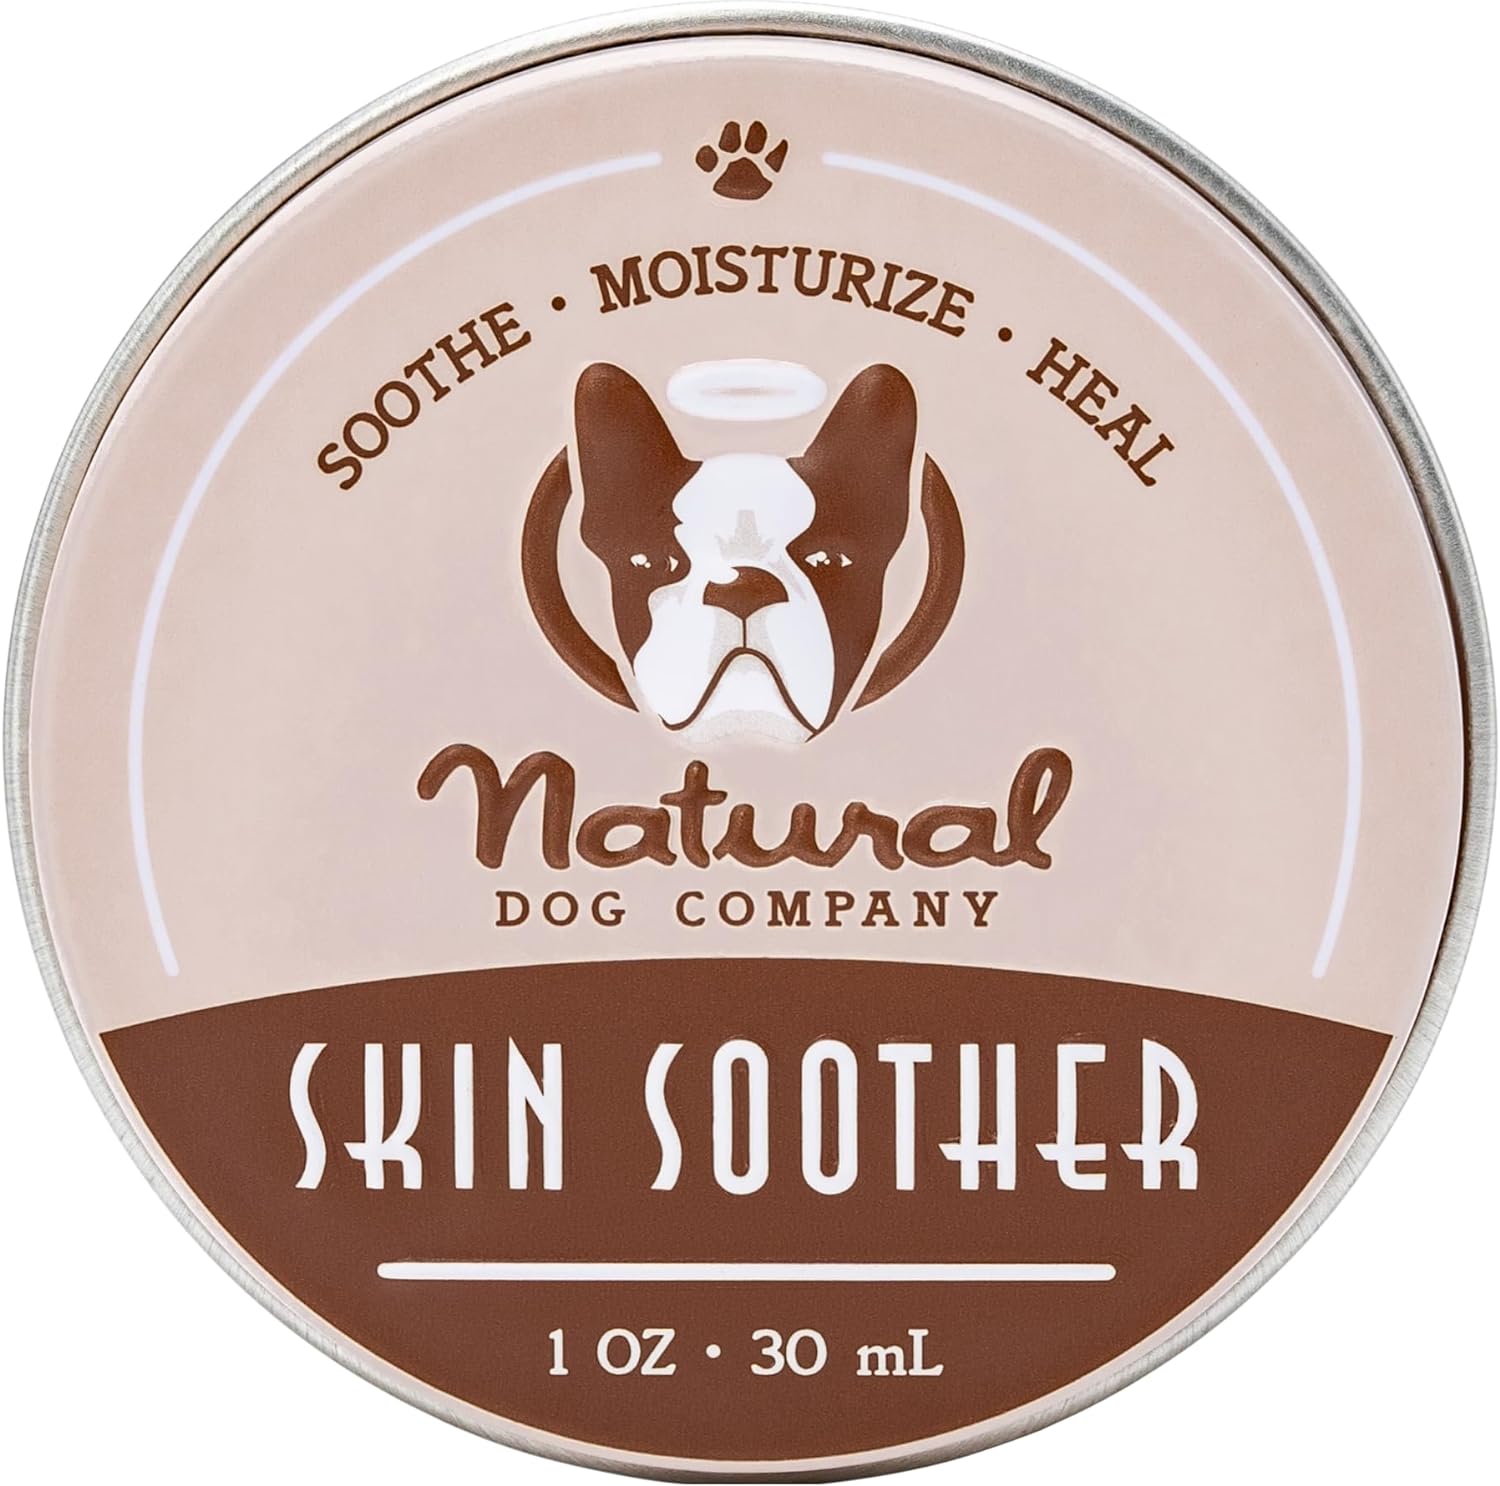 Natural Dog Company Skin Soother, 1 oz. Tin, Allergy and Itch Relief for Dogs, Dog Moisturizer for Dry Skin, Dog Lotion, Ultimate Healing Balm, Dog Rash Cream